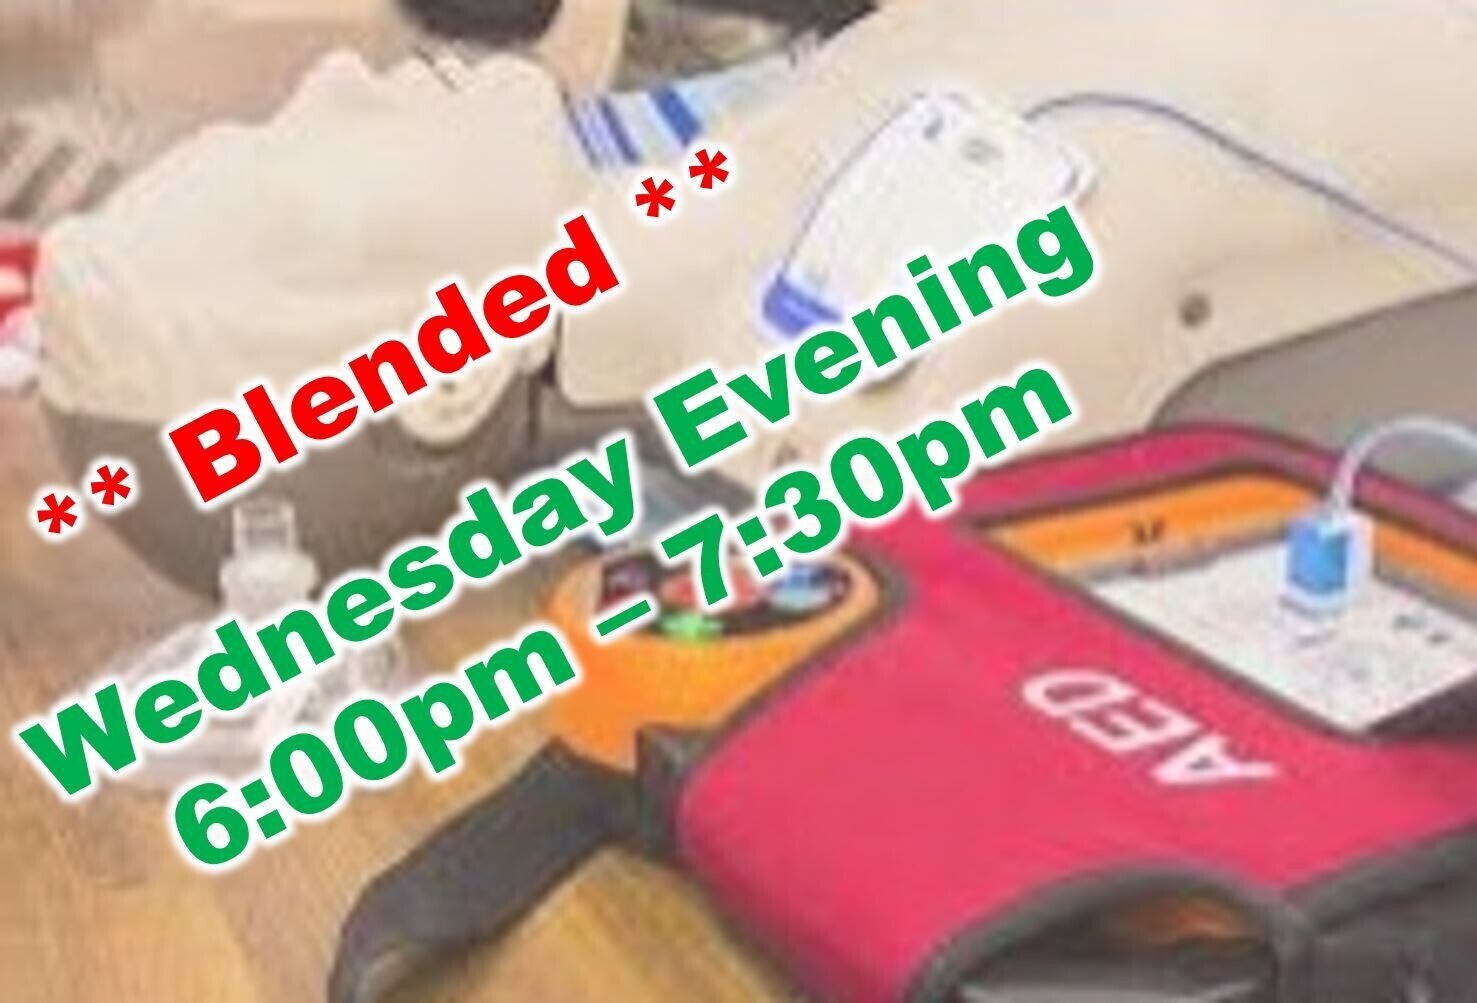 Mar. 16th, 2022 (Wednesday) 6:00pm-7:30pm CPR Class